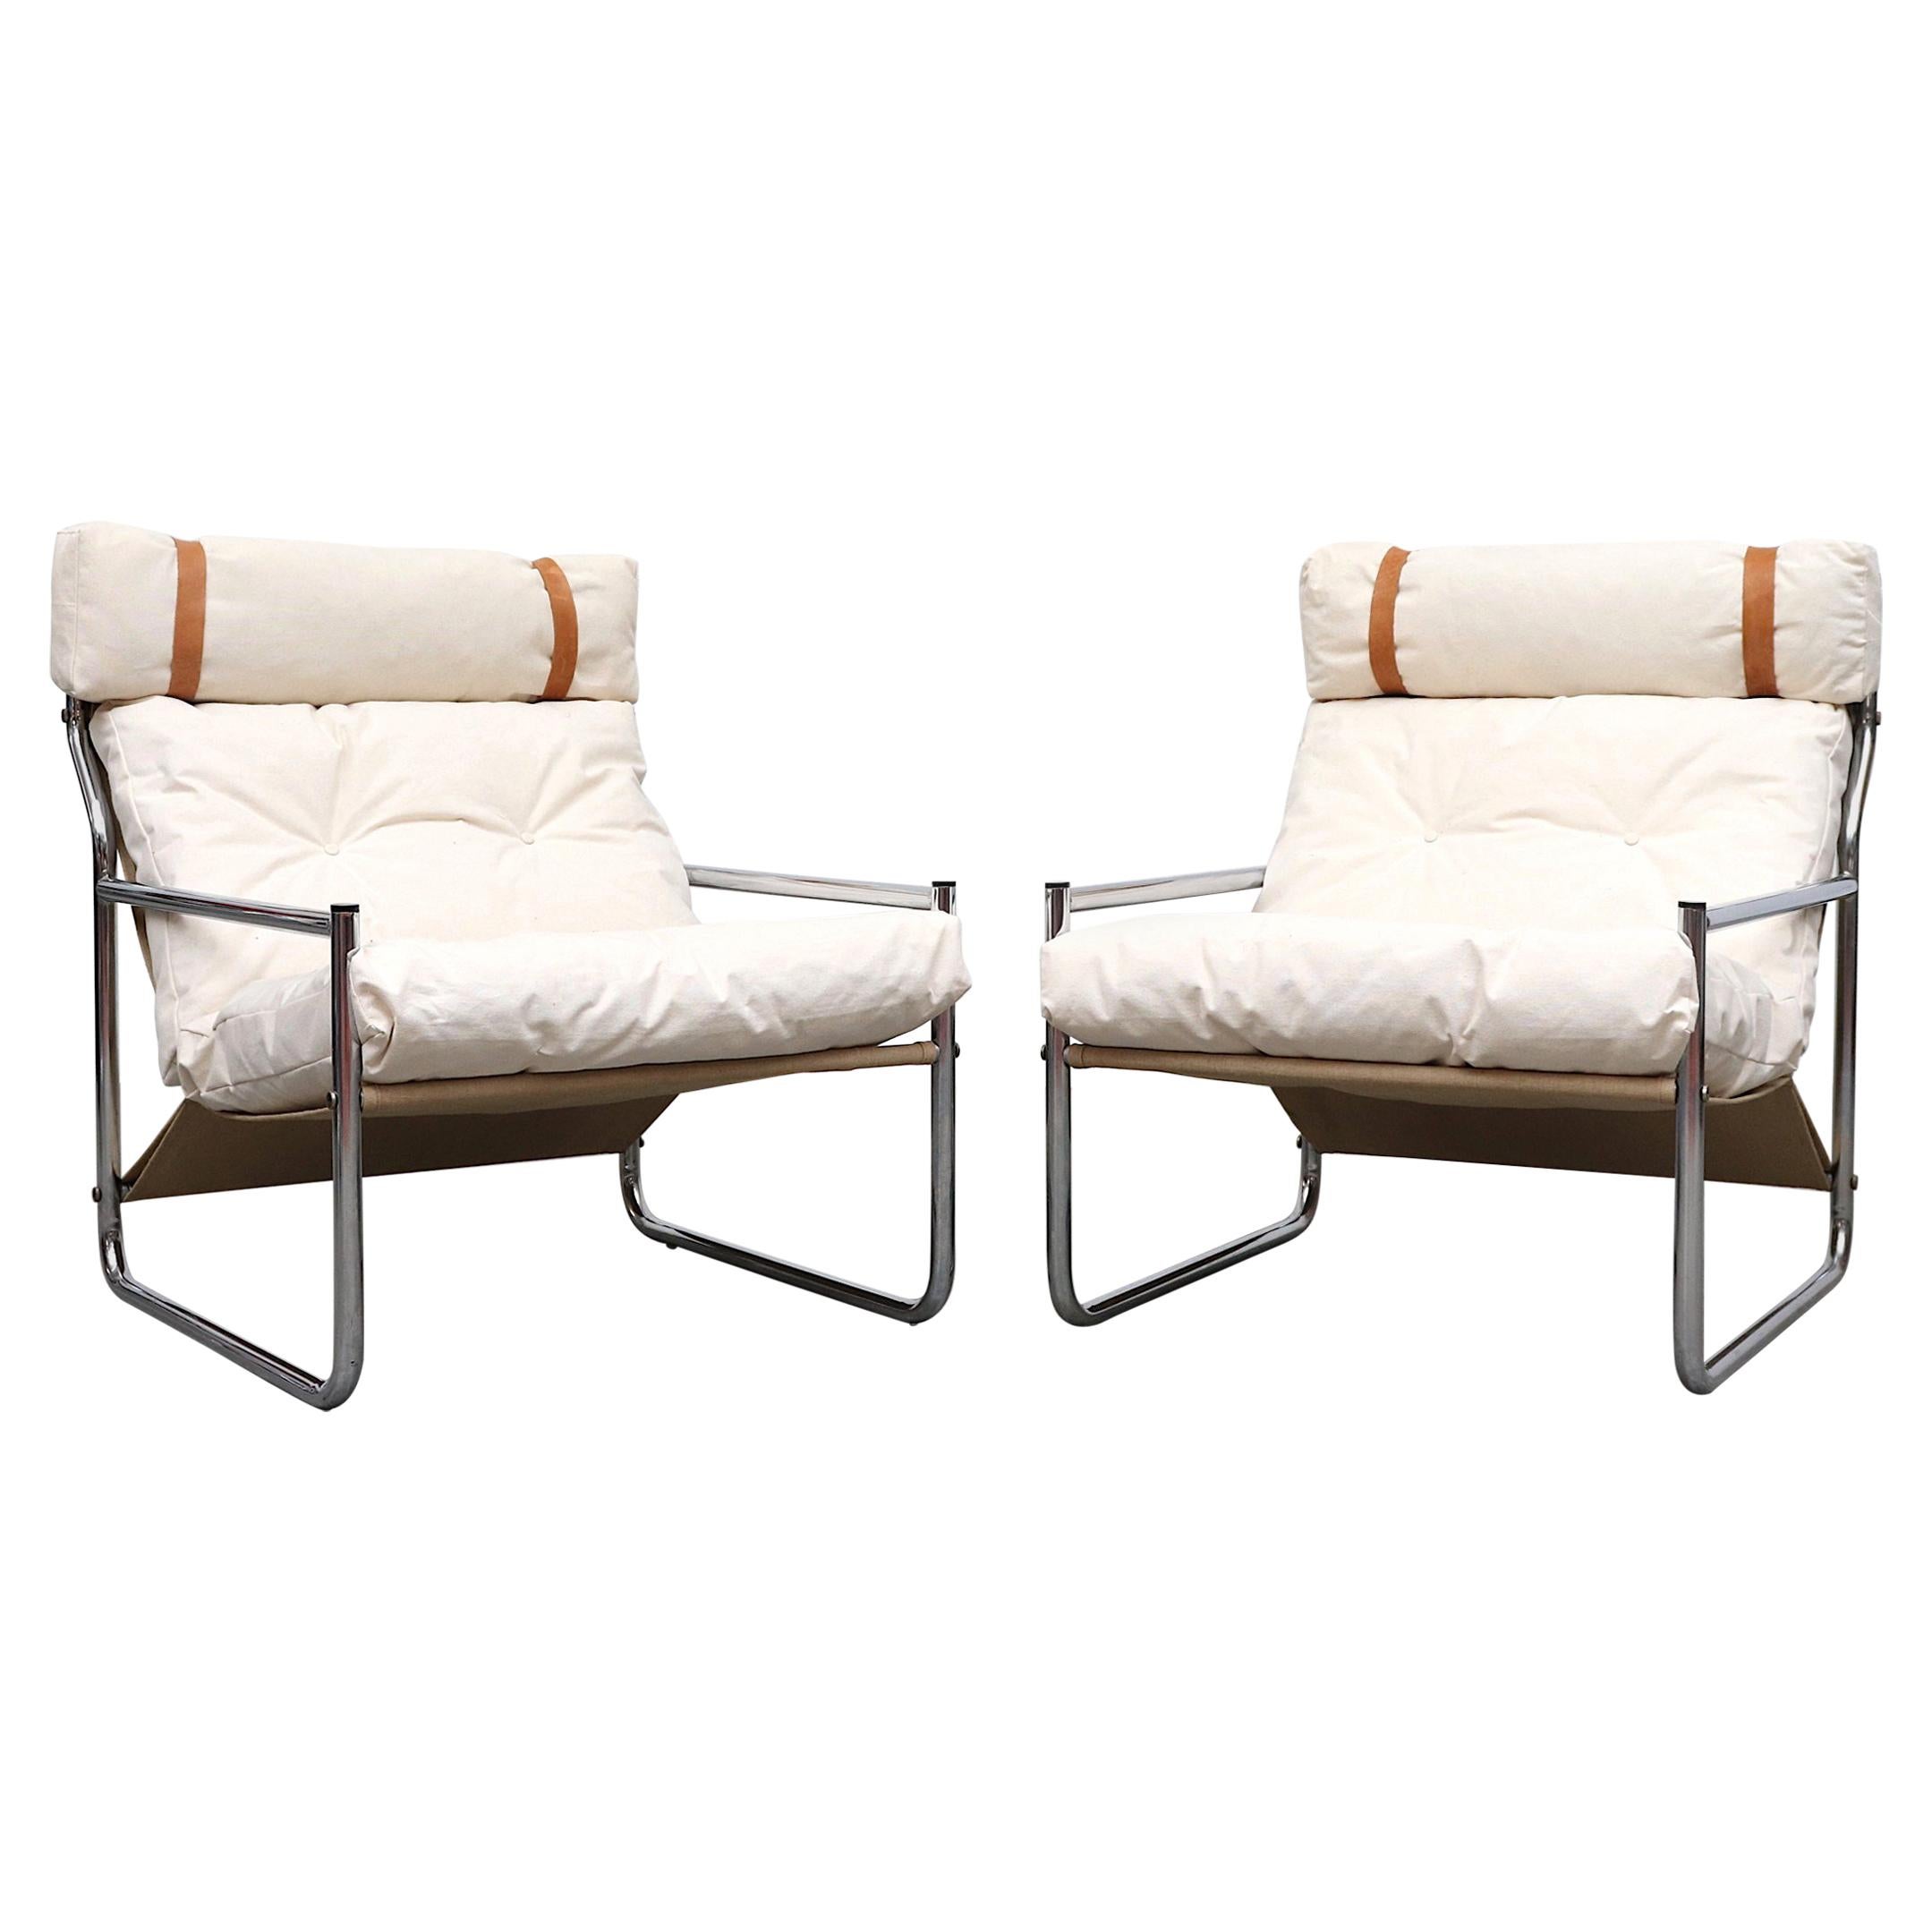 Pair of Chrome and Canvas Lounge Chairs with Headrests